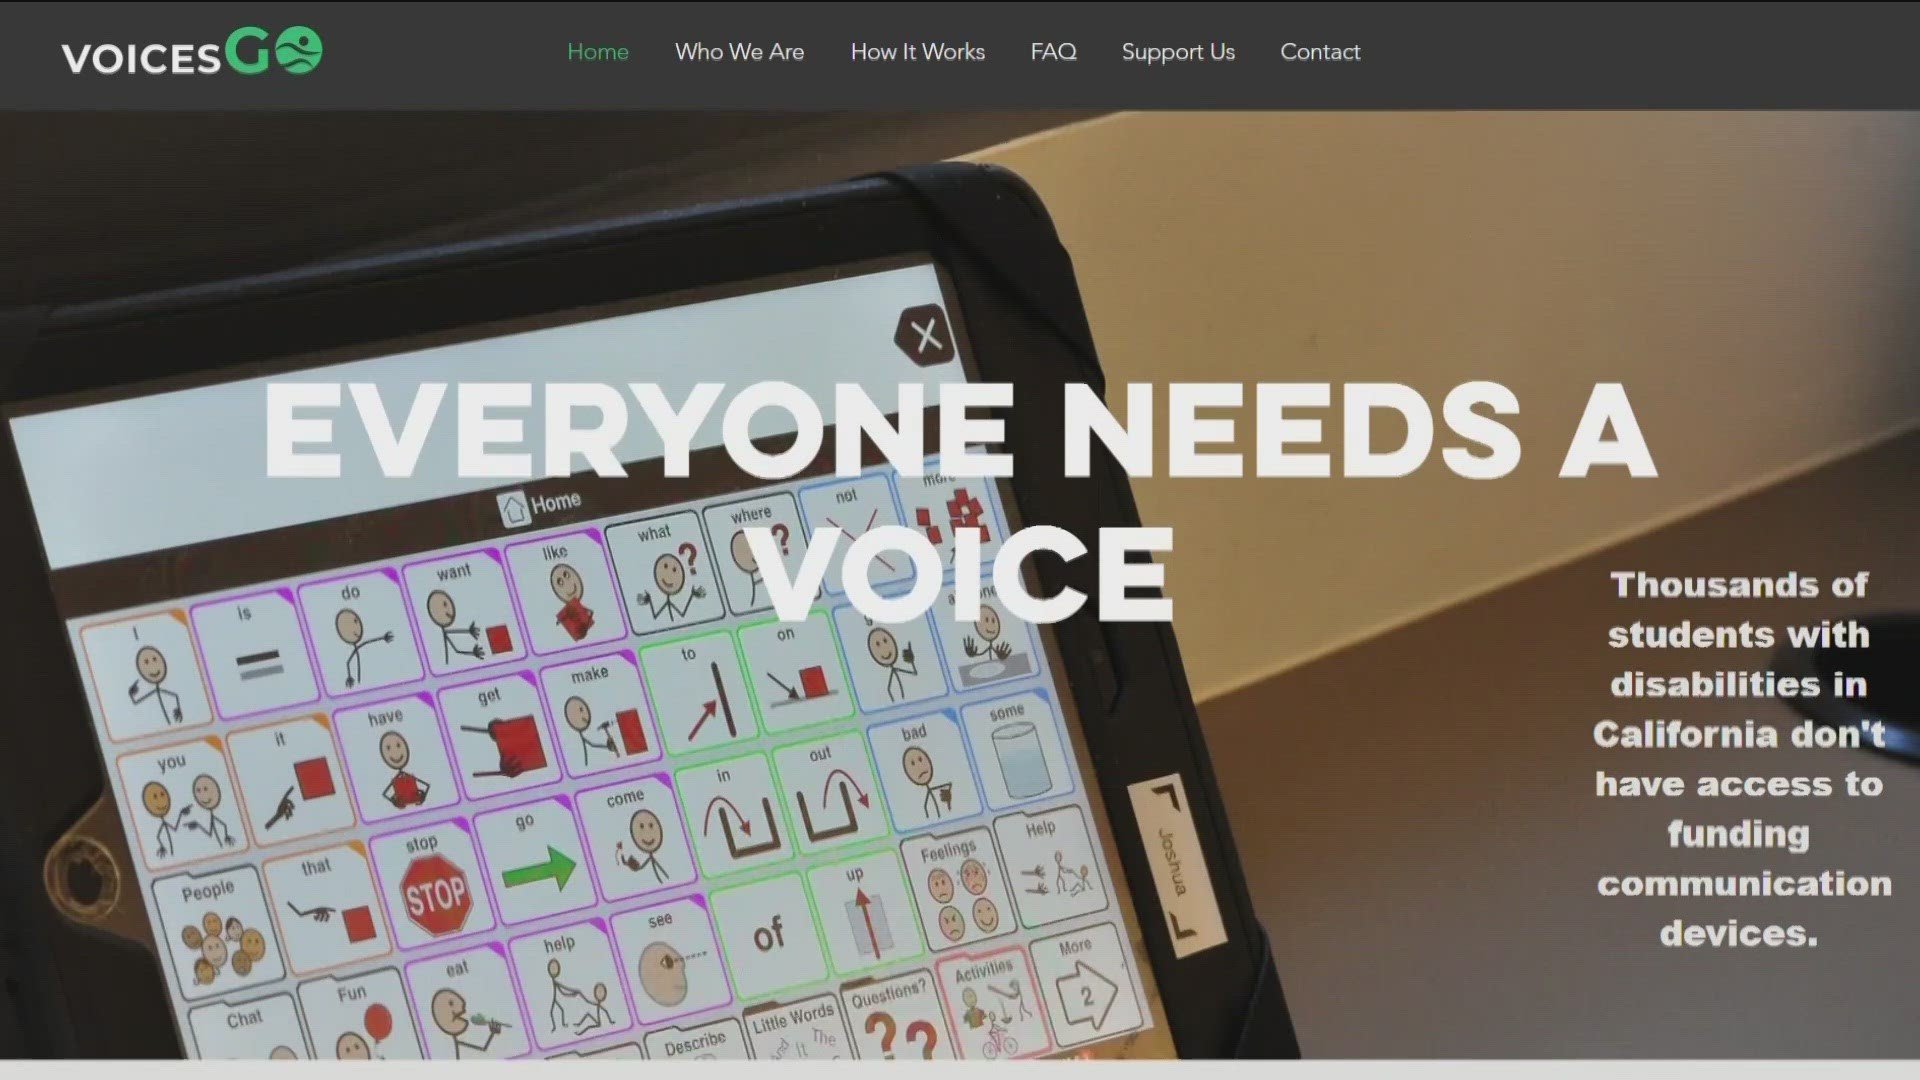 Roshan Shah created VoicesGo to lend communication devices to people who are non-verbal.